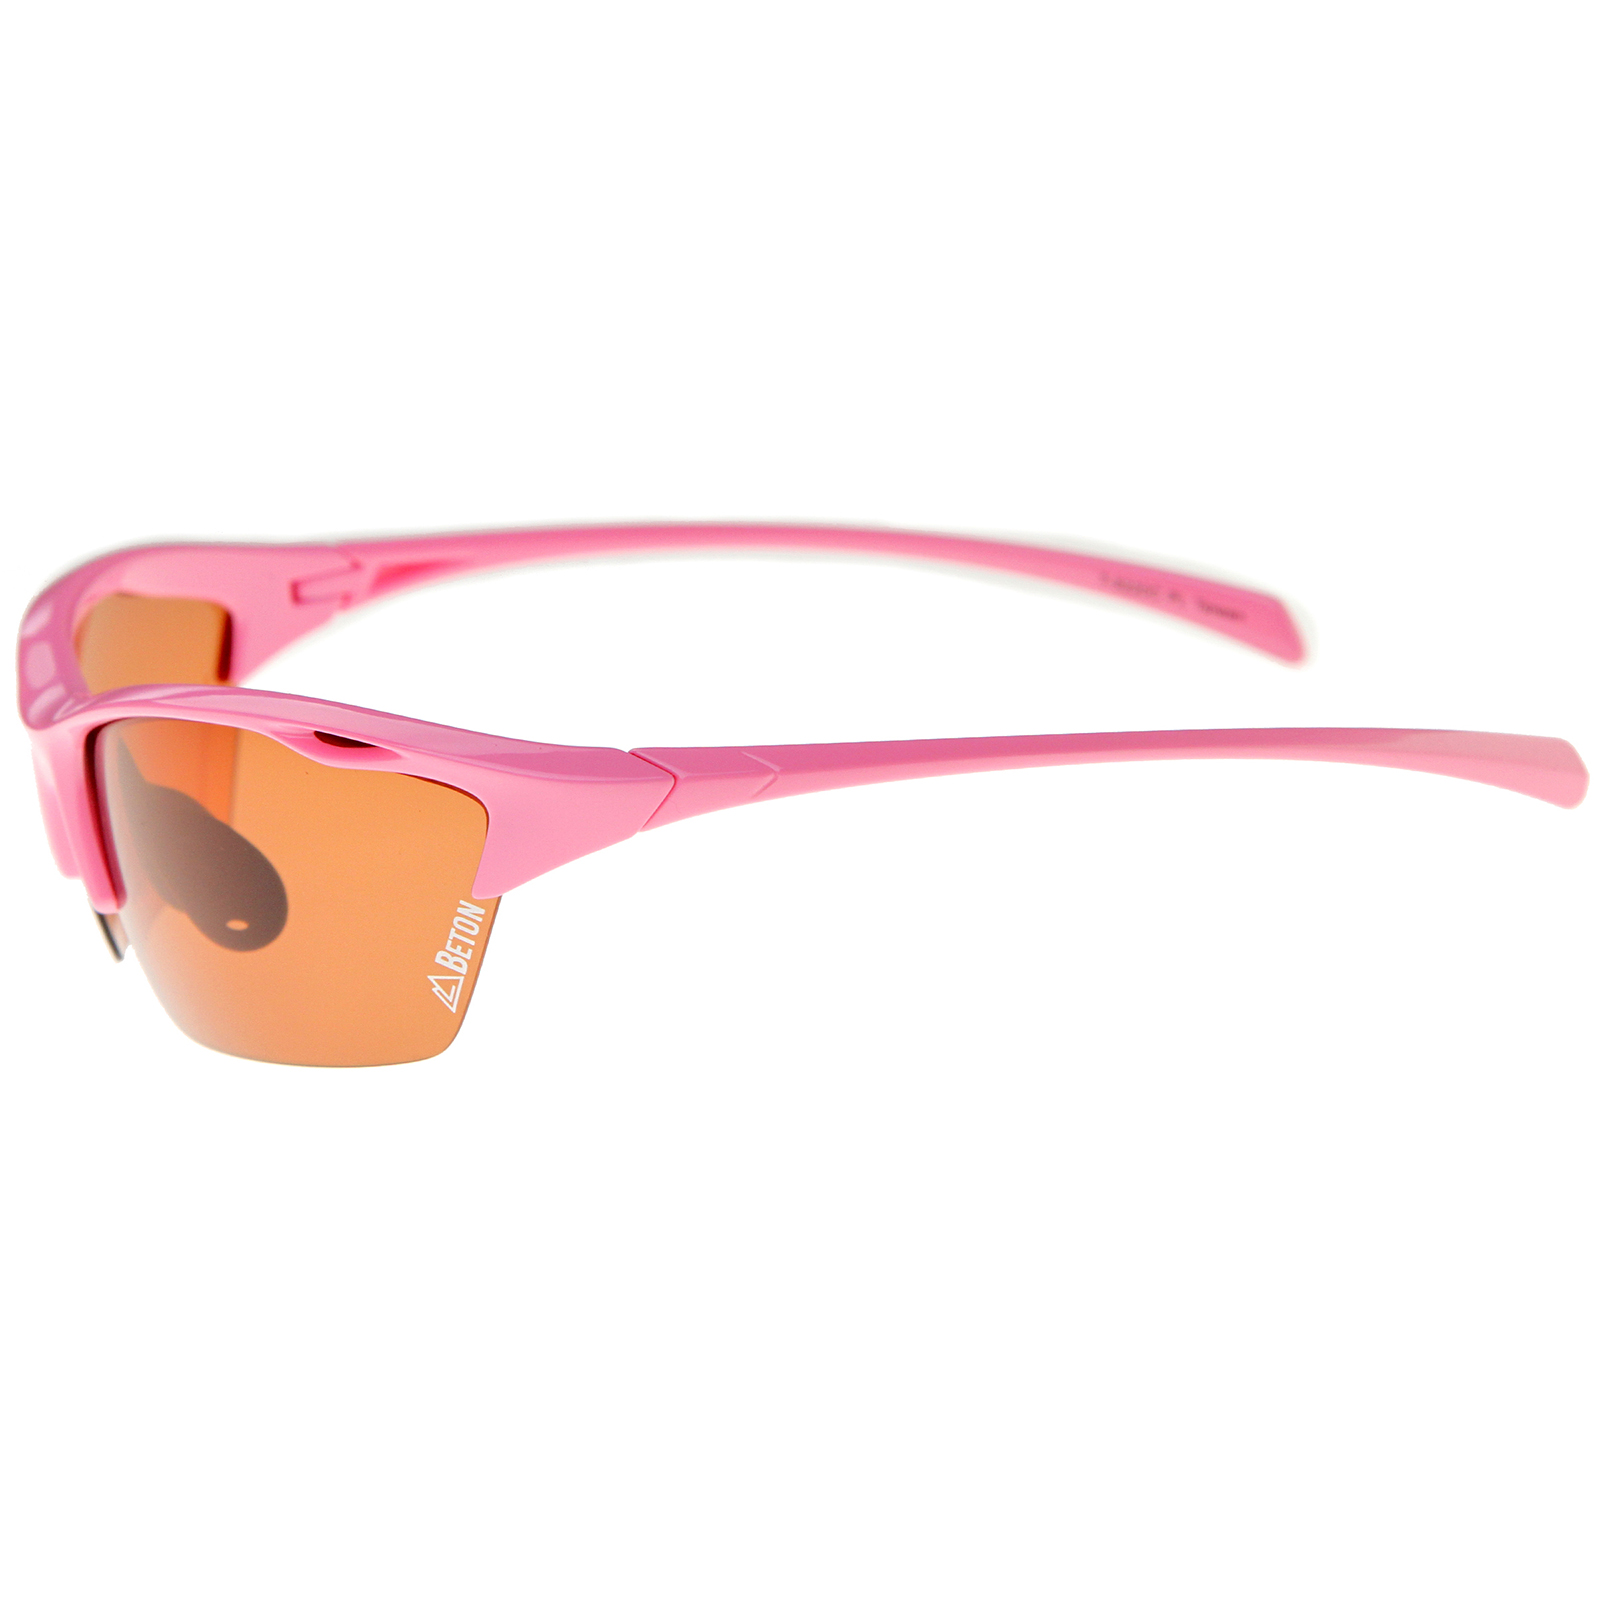 Beton Male Wakely - Polarized Shatterproof Lens Half-Frame TR-90 Sports Wrap Sunglasses (Shiny Pink / Brown) - 68mm - image 4 of 6